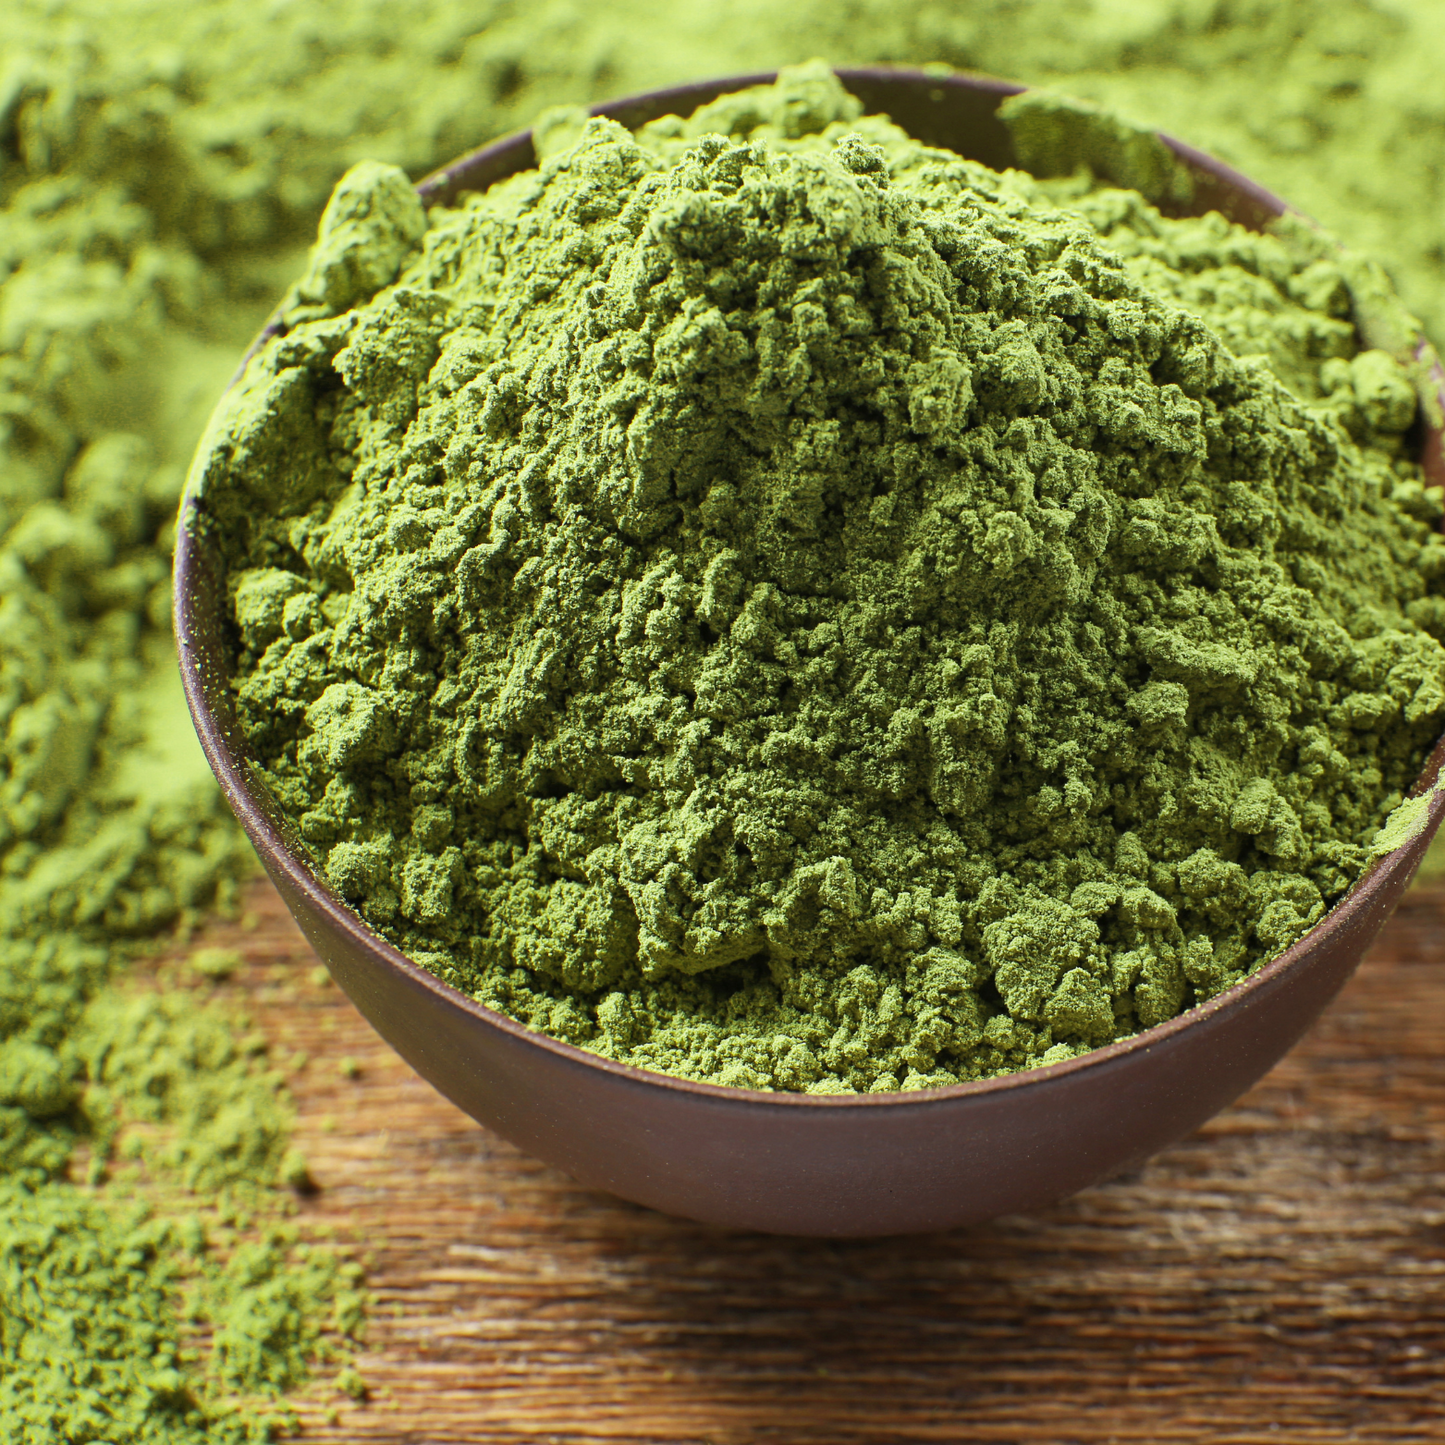 Witchy Pooh's Matcha Green Tea Powder, Ceremonial Grade, High Quality, Vibrate Green Color-0